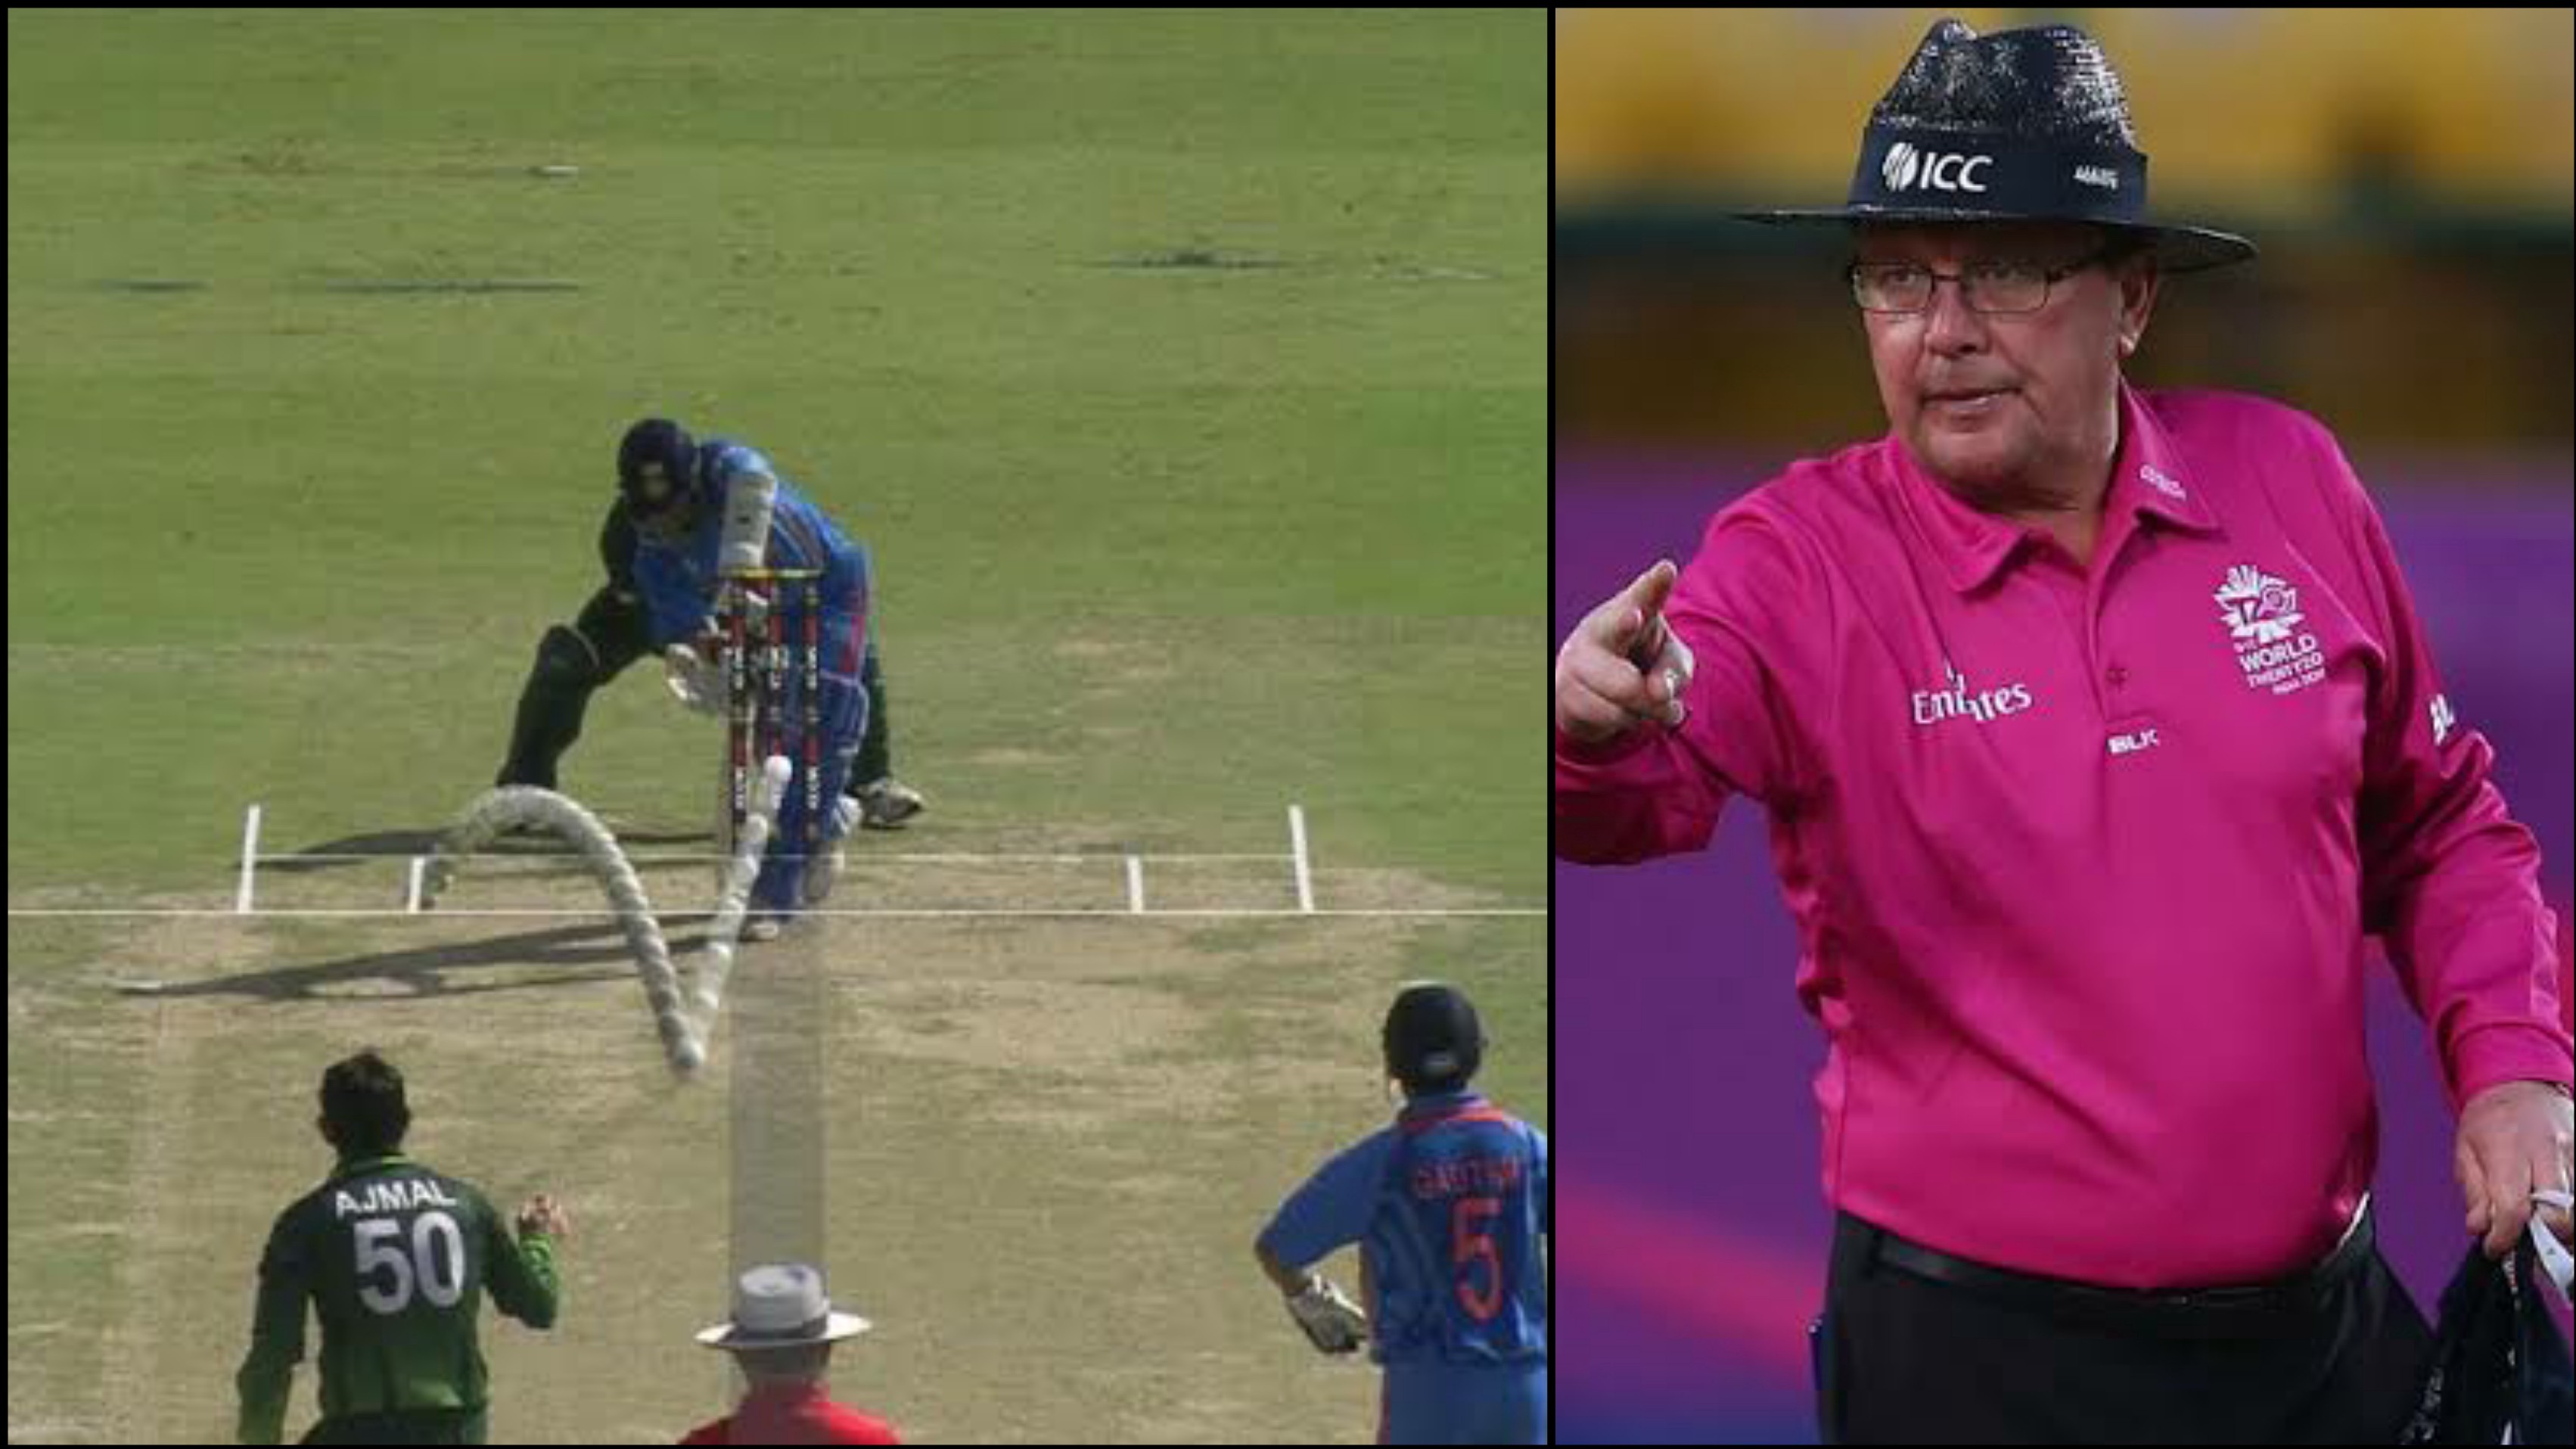 “I’d still give it out, simple as that” – Ian Gould recalls his infamous Sachin Tendulkar’s LBW decision